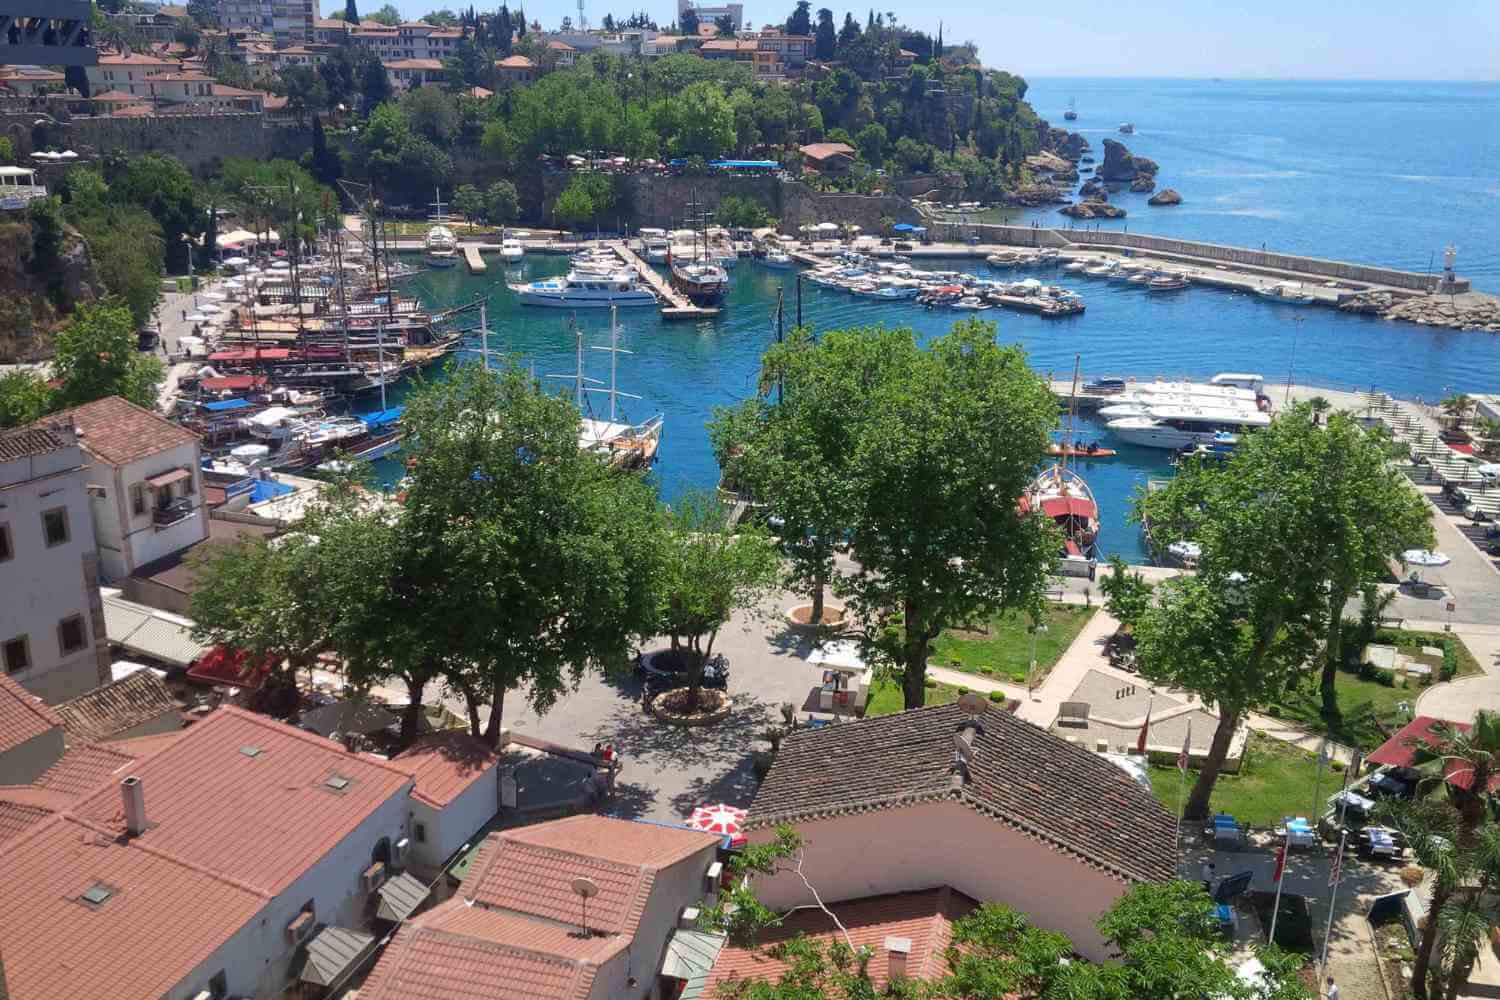 Antalya Sea front is dotted with cafes and eateries, Kaleici is a centre for sophisticated eateries; Antalya city centre is full of shops and eateries, Antalya shopping malls, the latest fashion in Antalya, and Restaurants in Antalya.